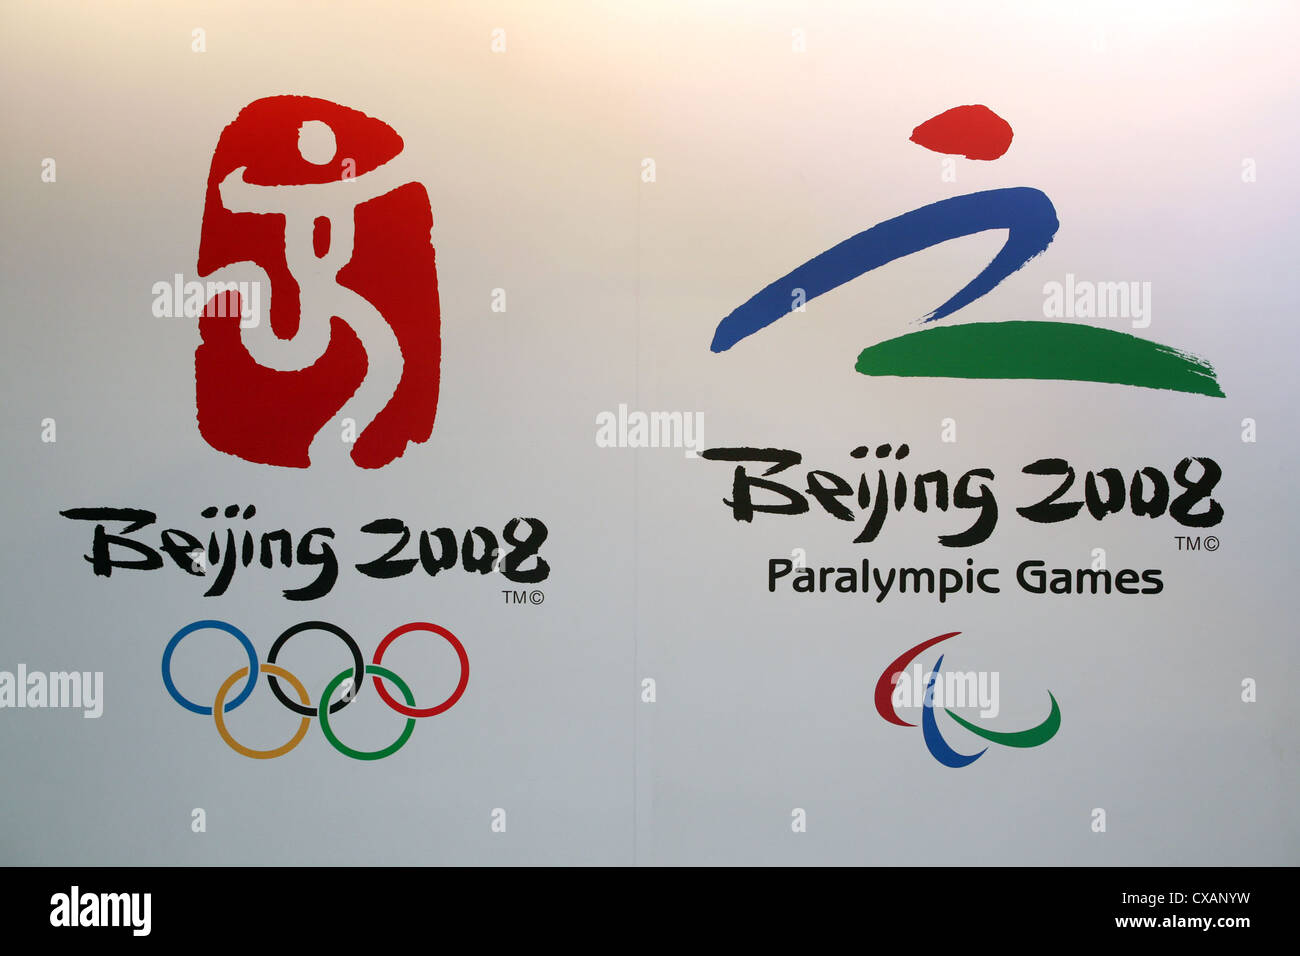 Symbol photo, logo of the Olympic Games and the 2008 Paralympics in Beijing Stock Photo